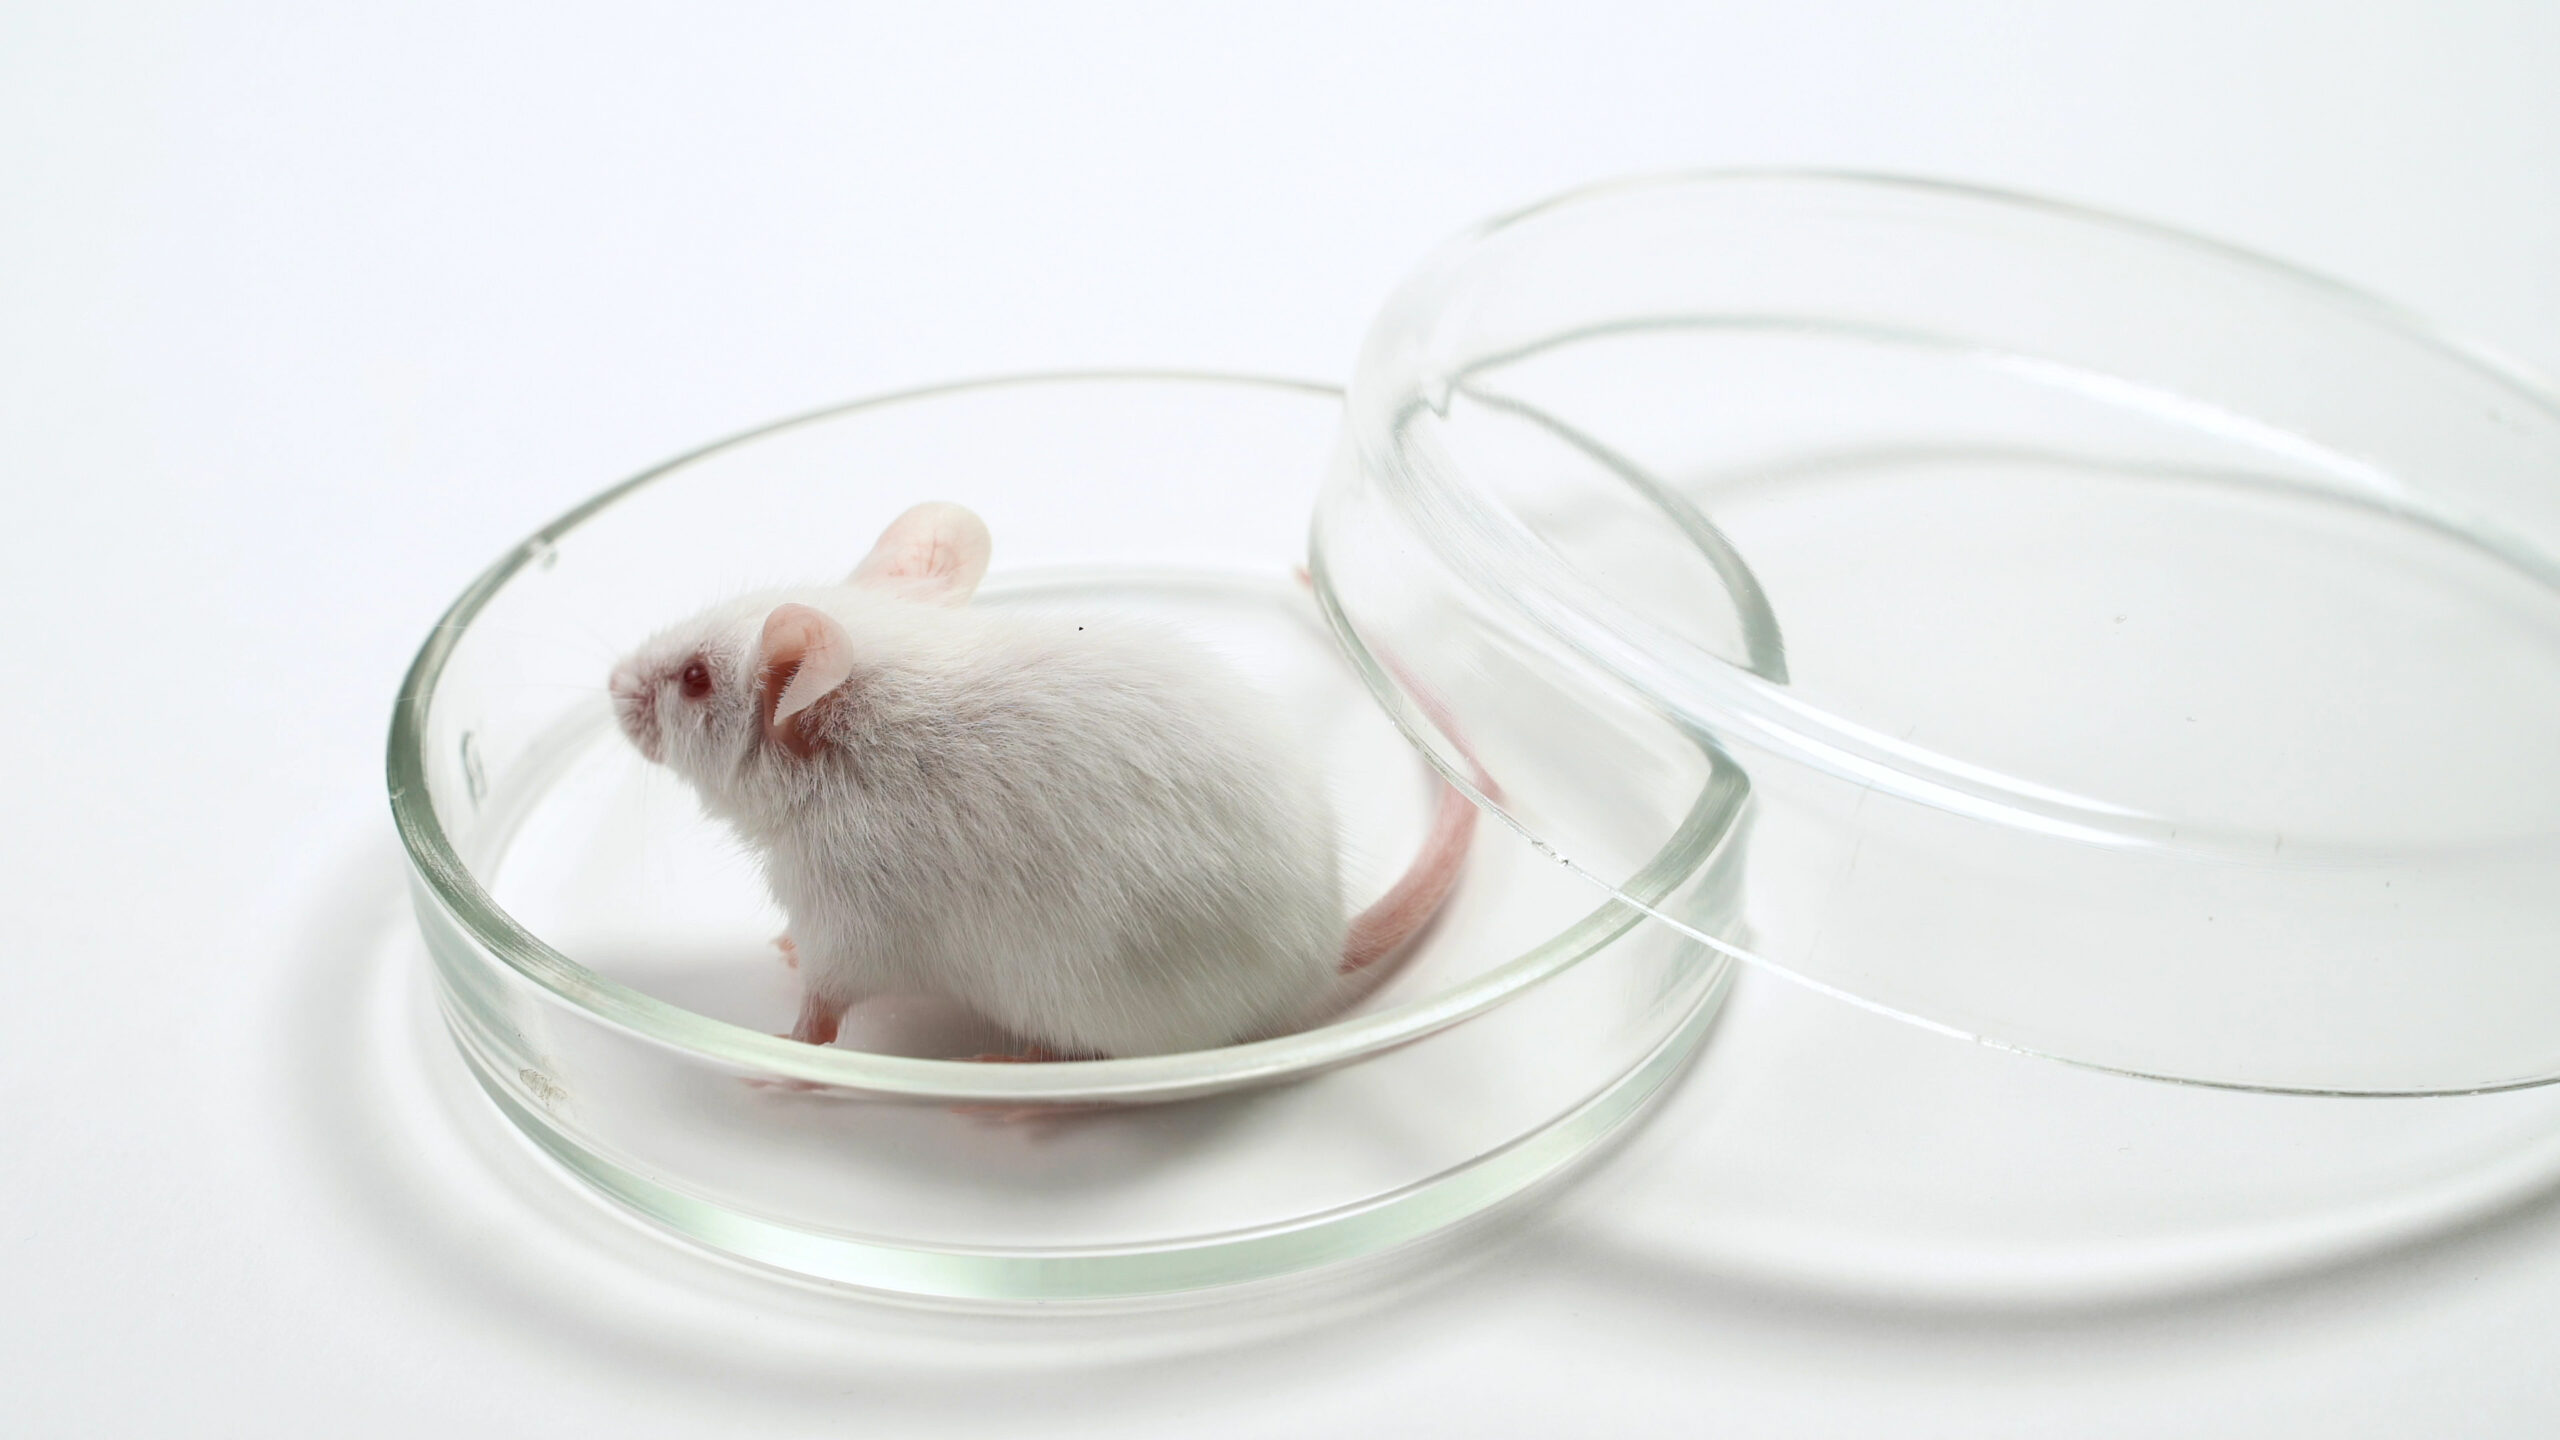 Gene Identified In Mice That Controls Food Cravings And Desire To Exercise